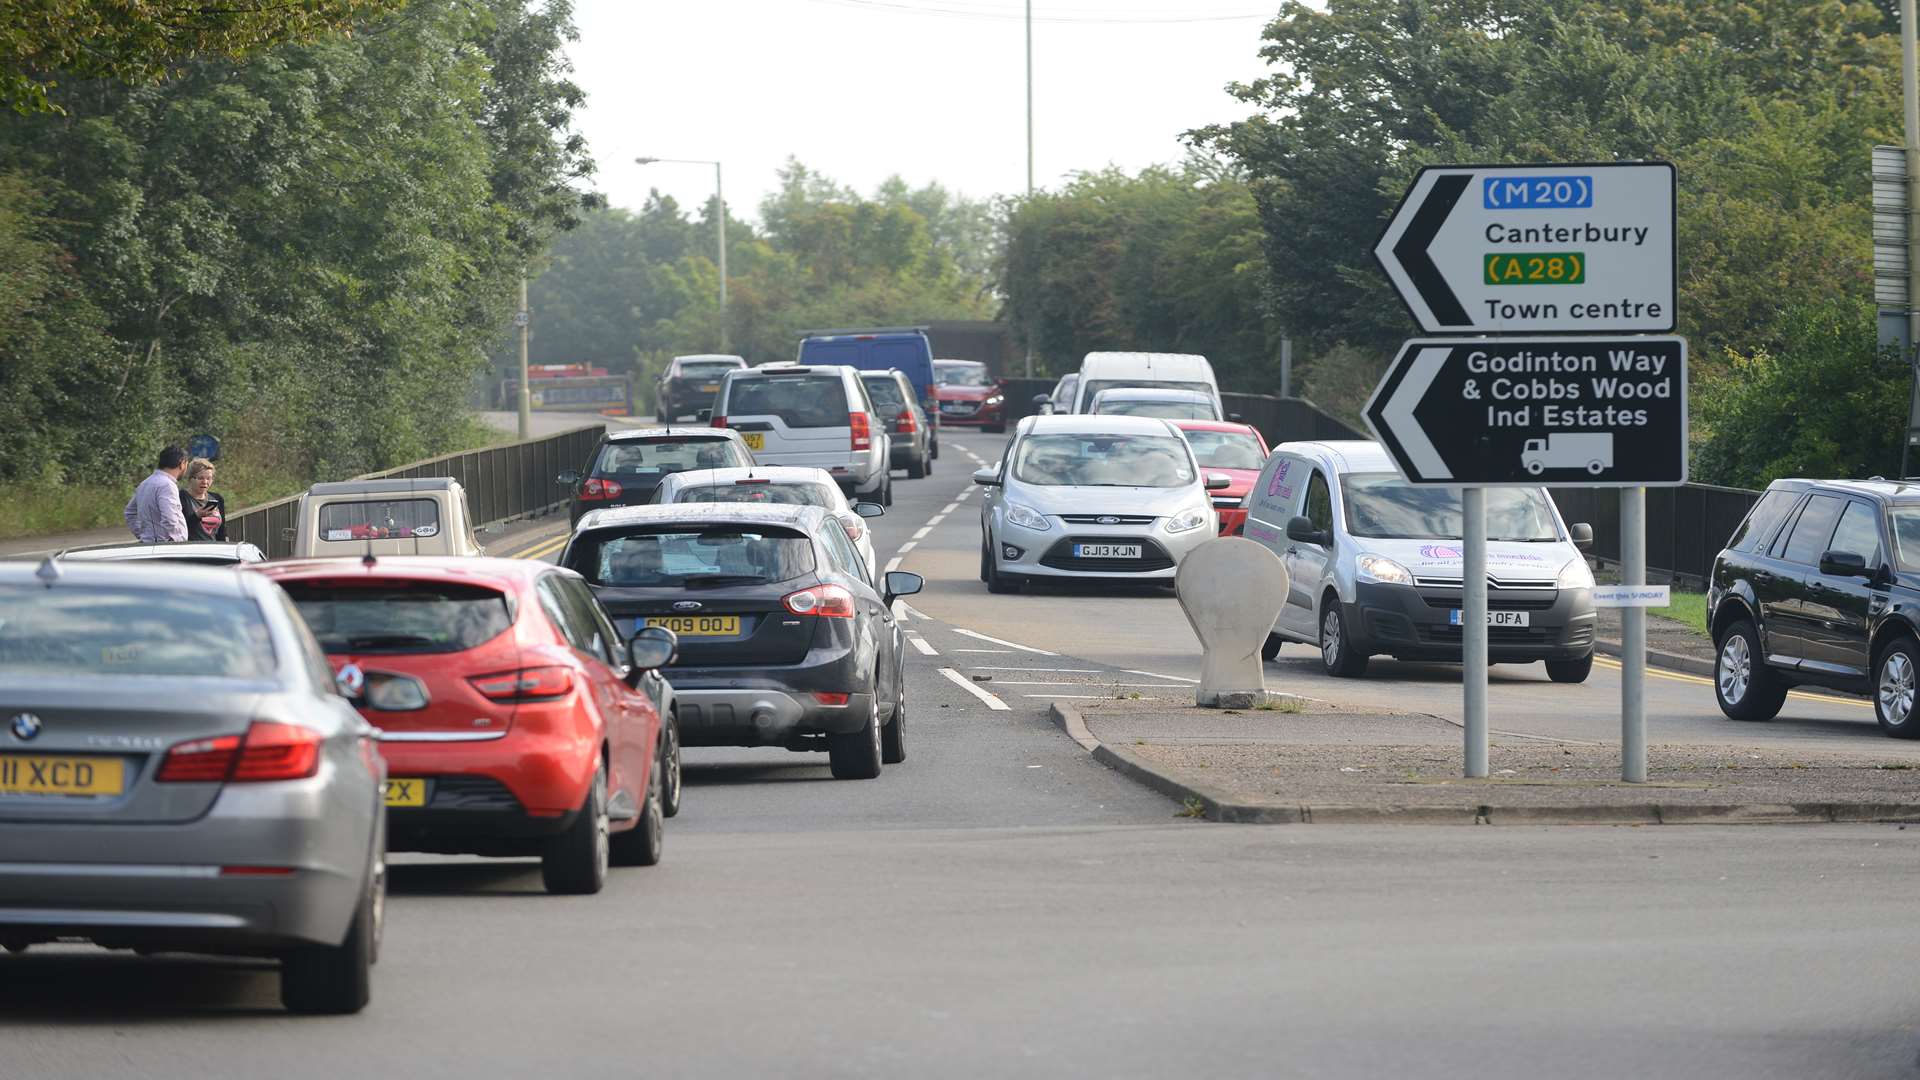 The scheme will see the road widened between the 'Tank' roundabout and Matalan roundabout